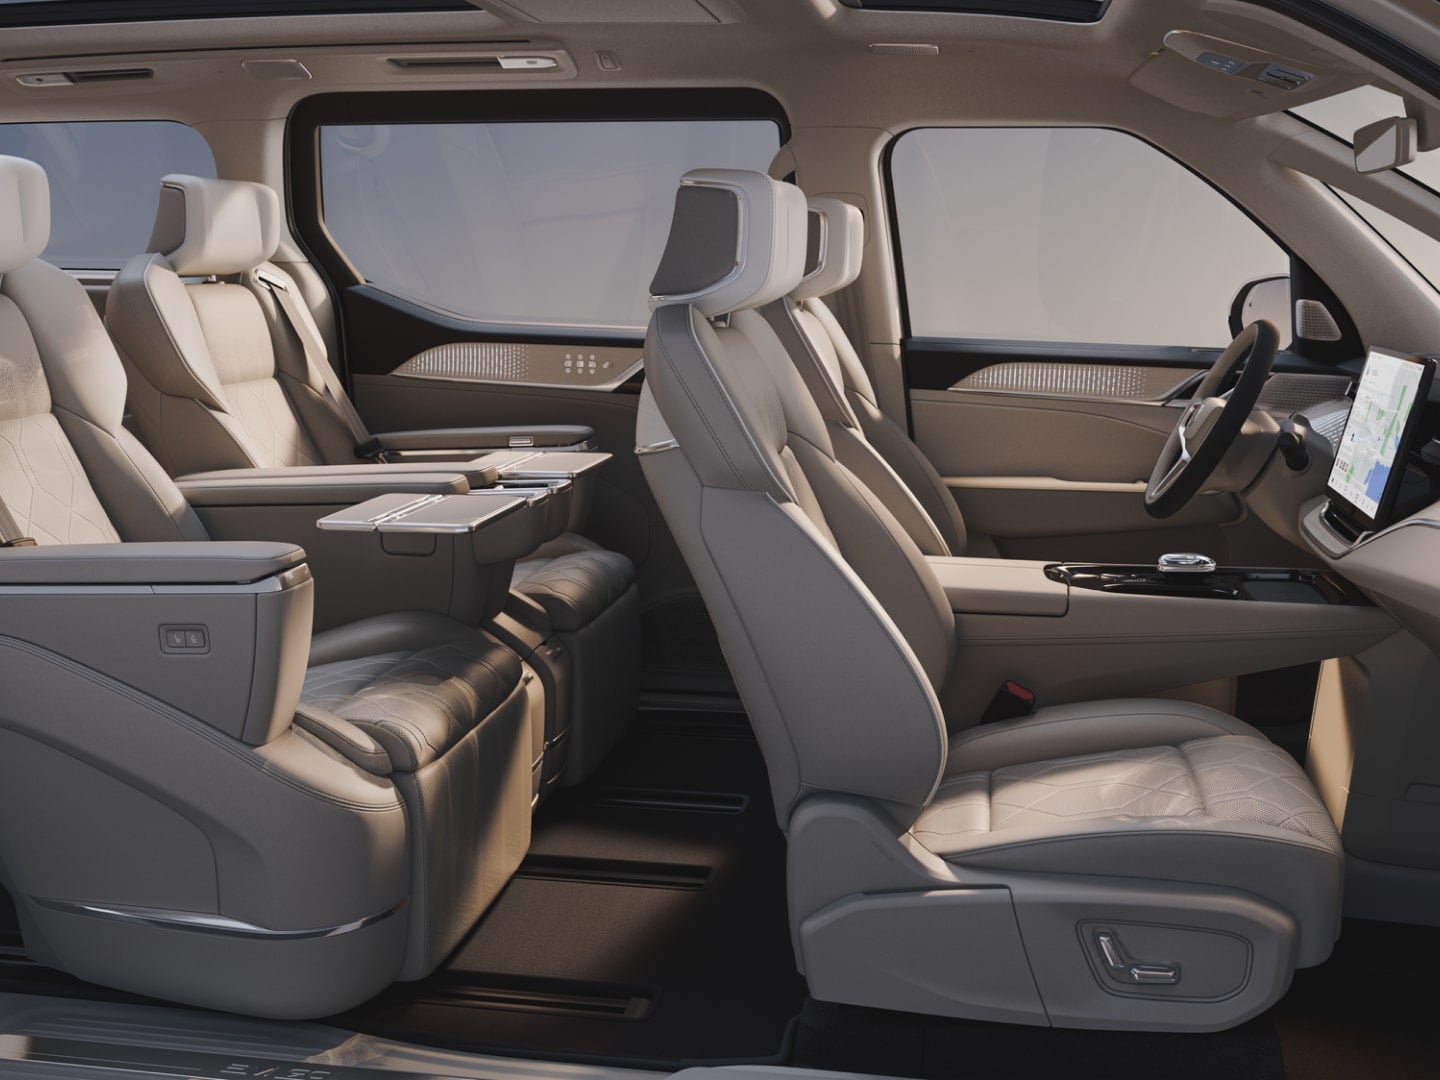 The first two rows of the spacious 6-seater fully electric EM90 MPV.